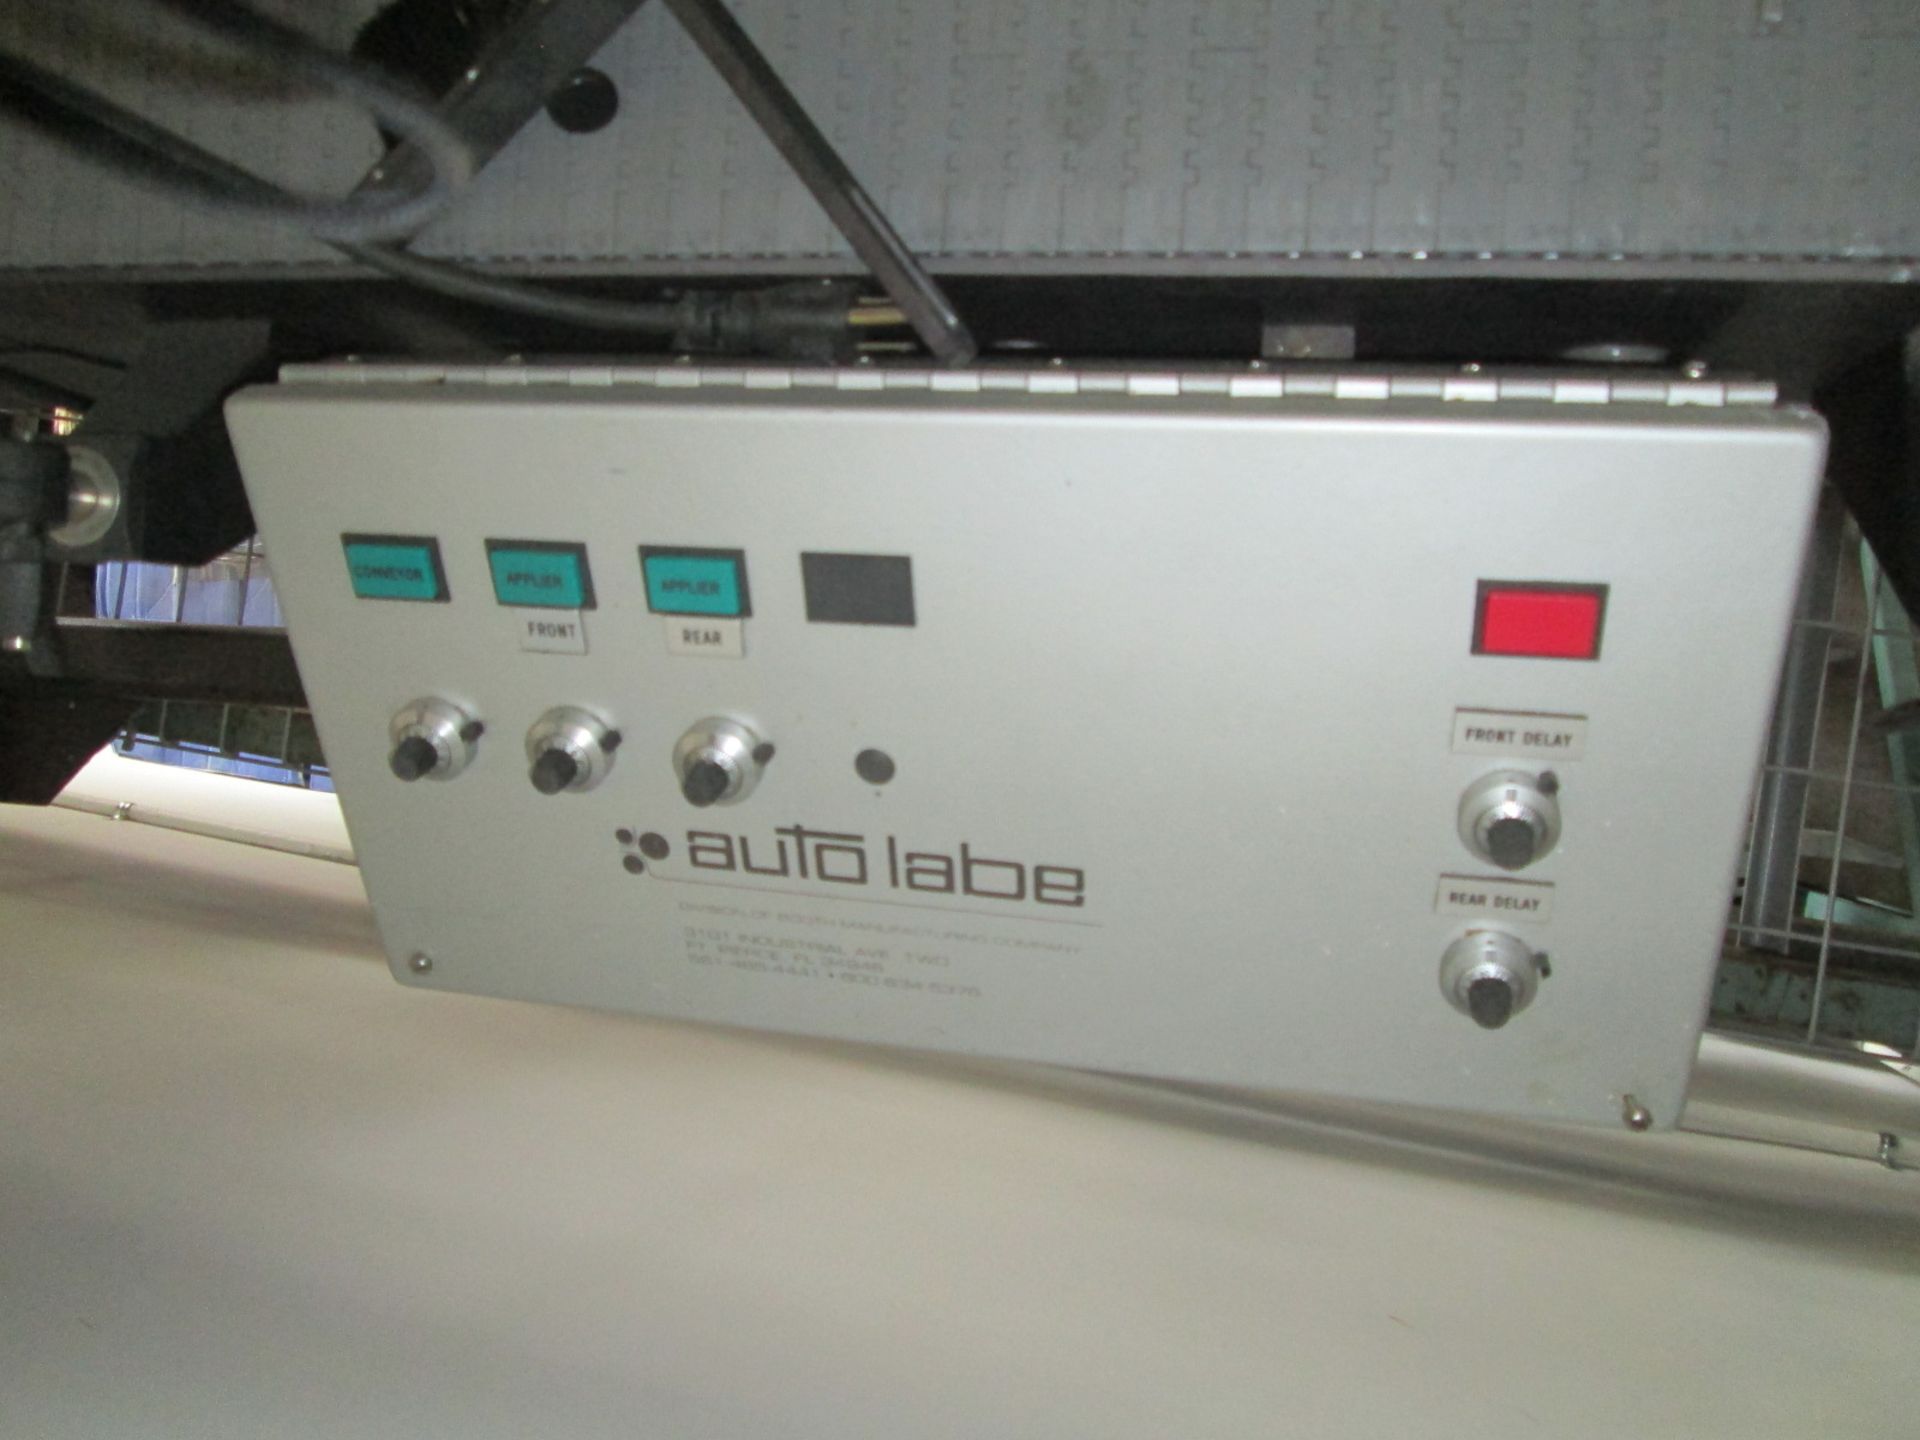 Auto-Labe Model Top Labeler, Model 110LH, Serial number 001167 with conveyor - Bild 3 aus 10